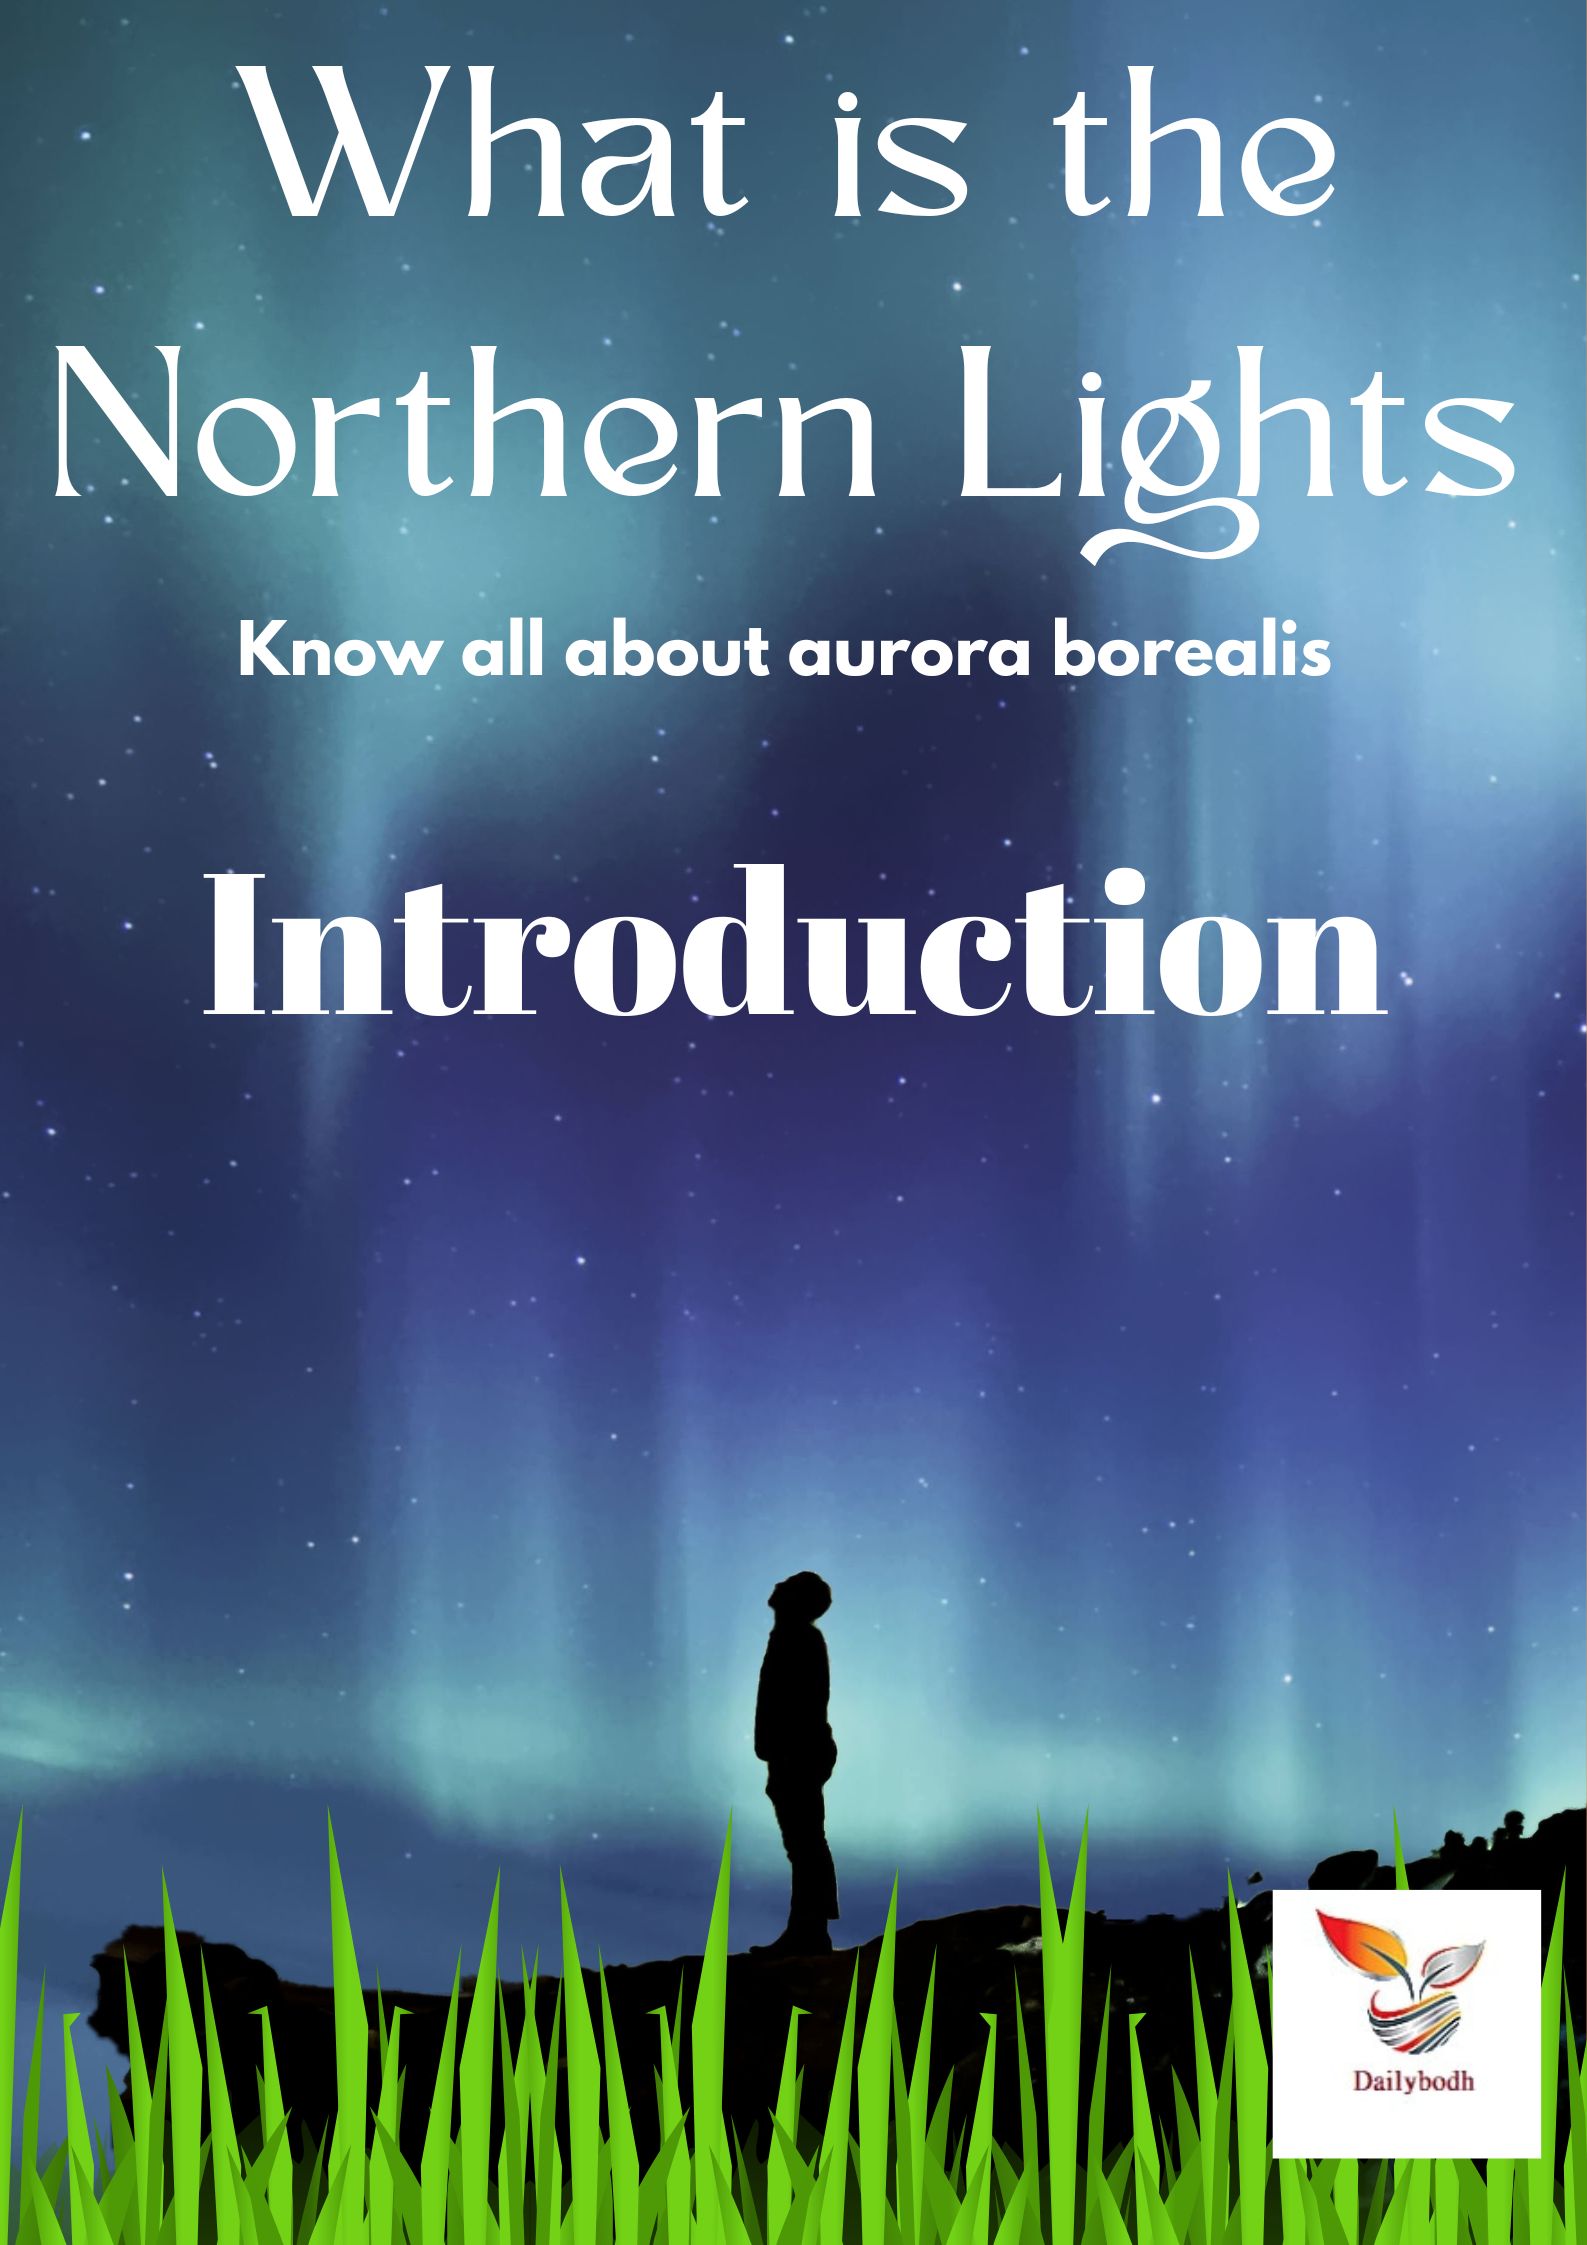 Introduction (What is the Northern Lights)